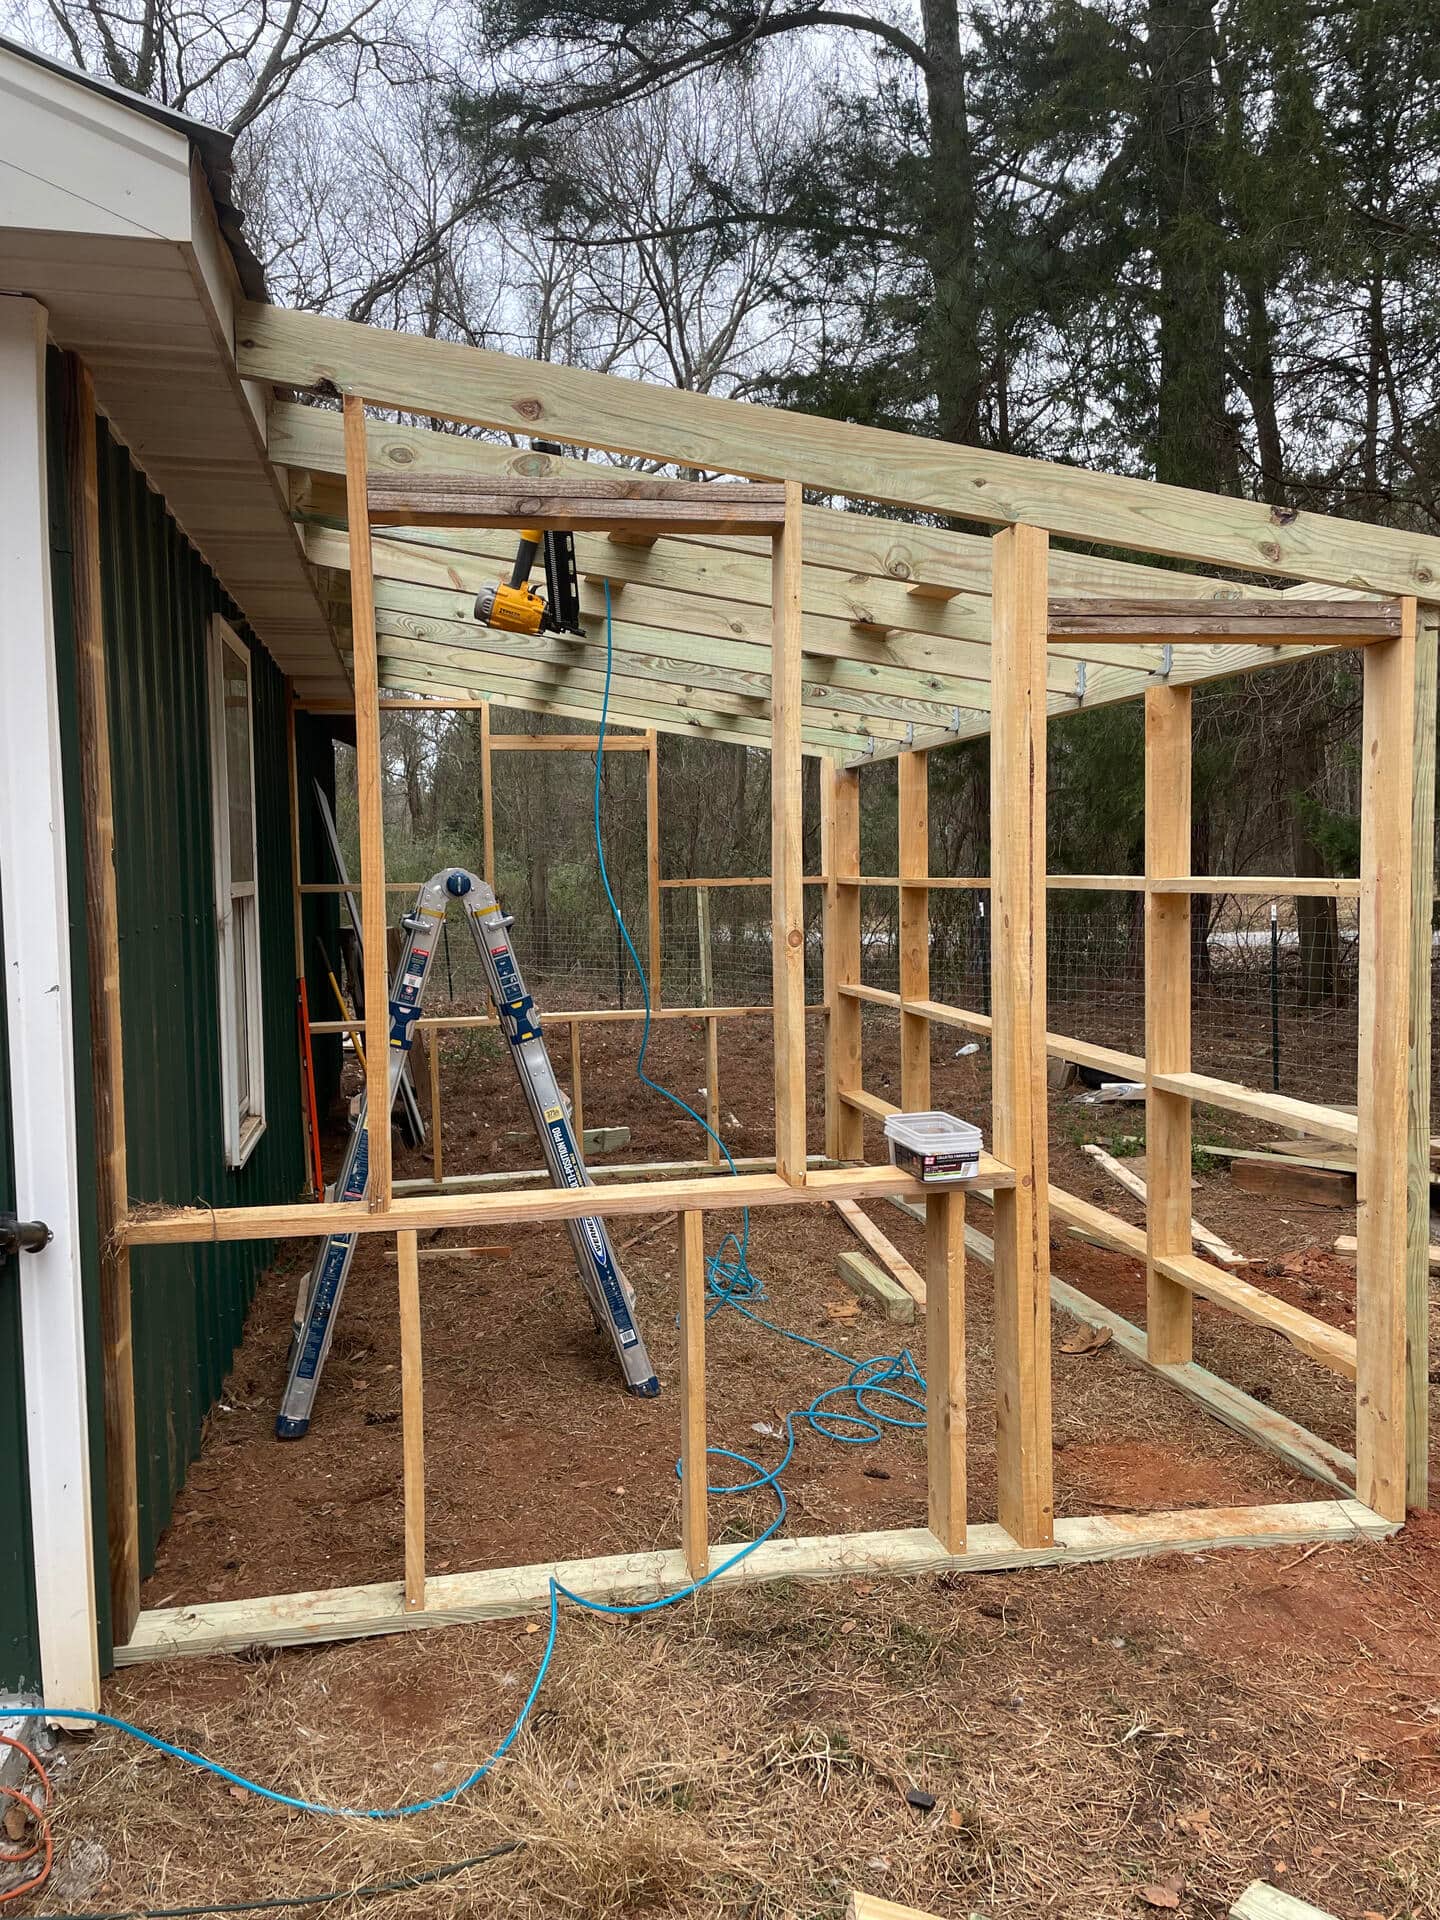 The front of the greenhouse in progress.